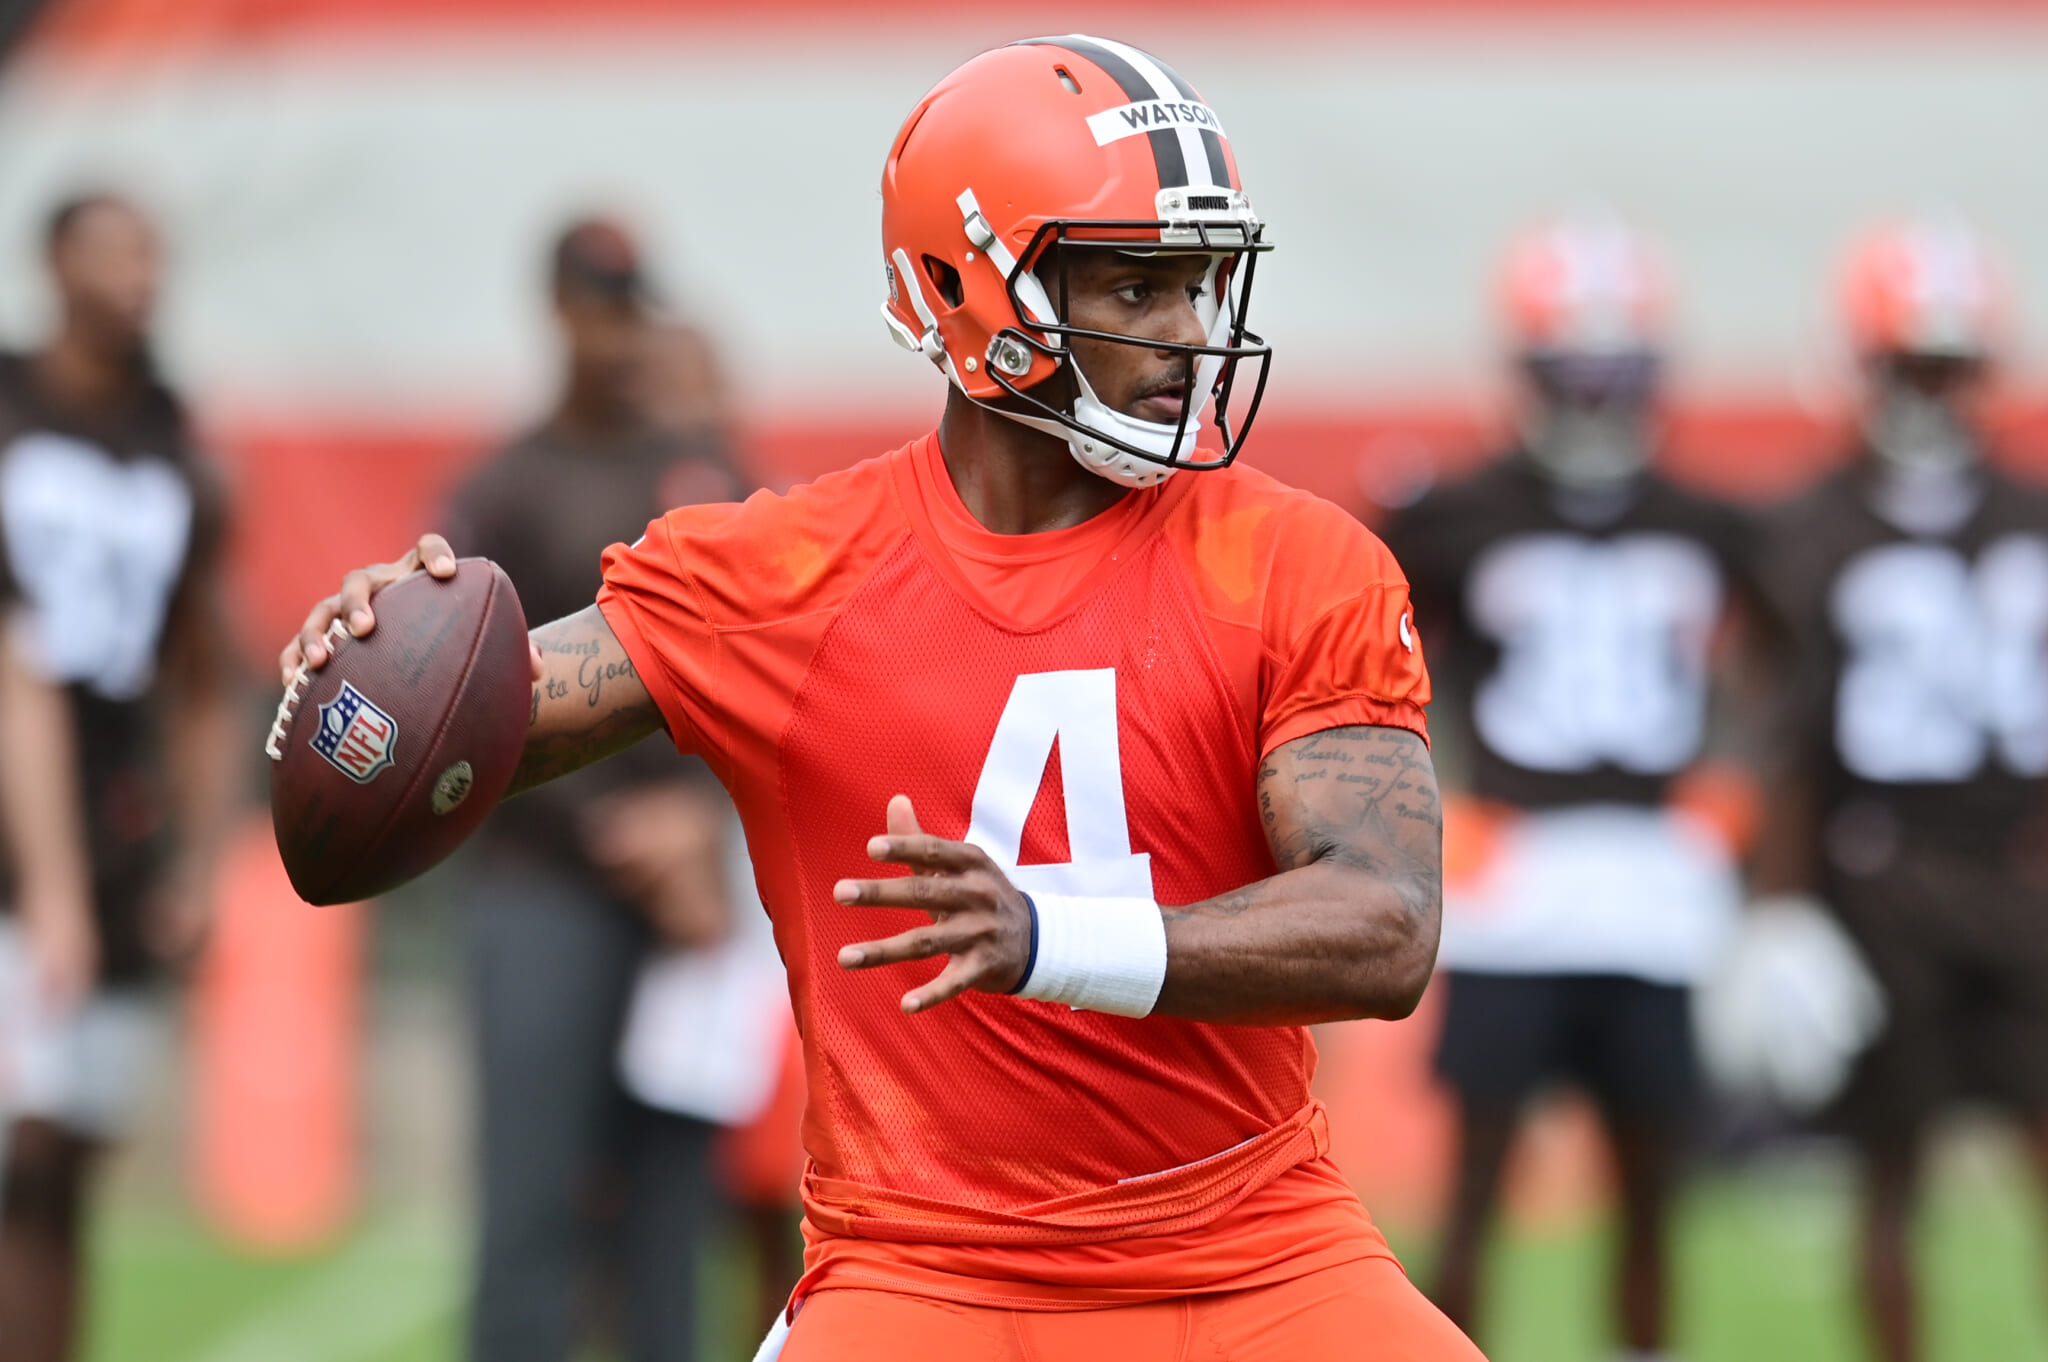 Cleveland Browns training camp 2022: Schedule, tickets, location, and